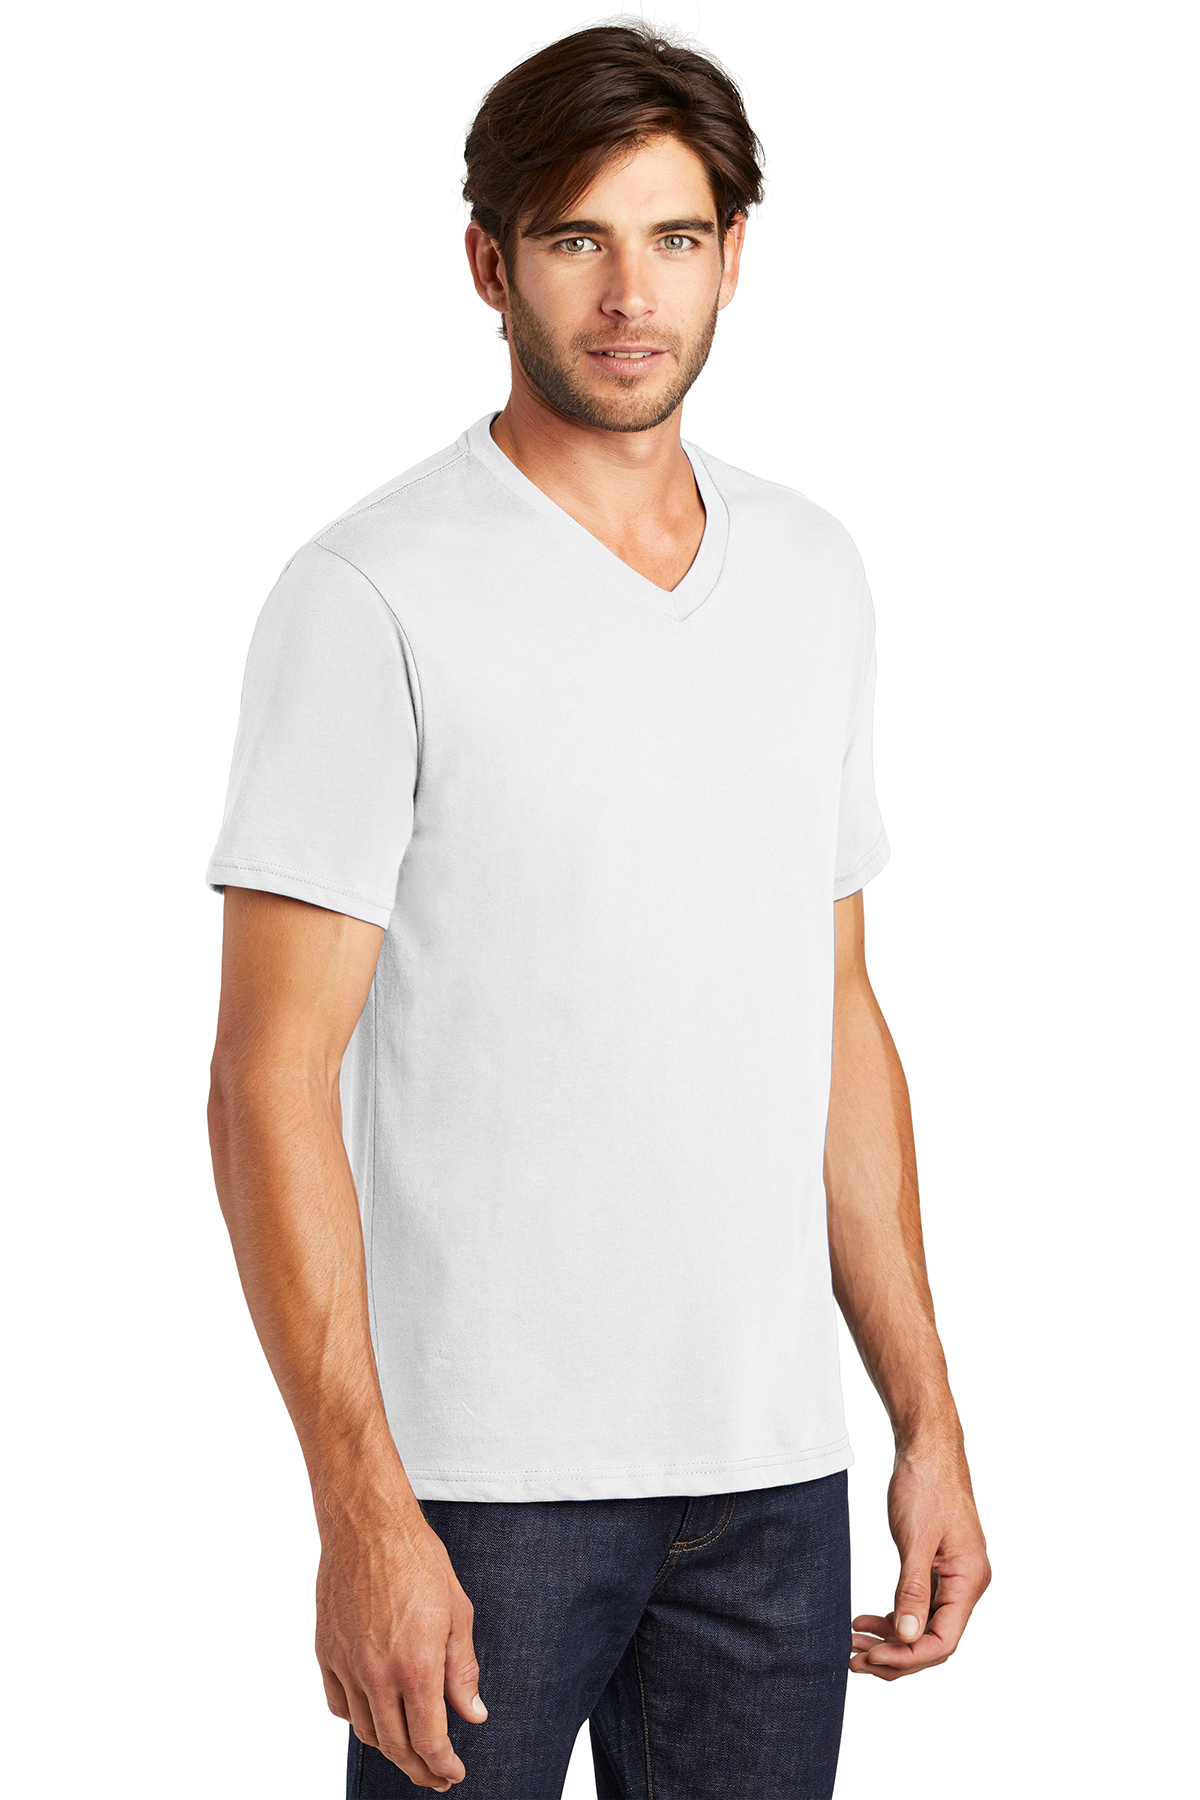 District Made Mens Perfect Weight V-Neck Tee | Product | SanMar